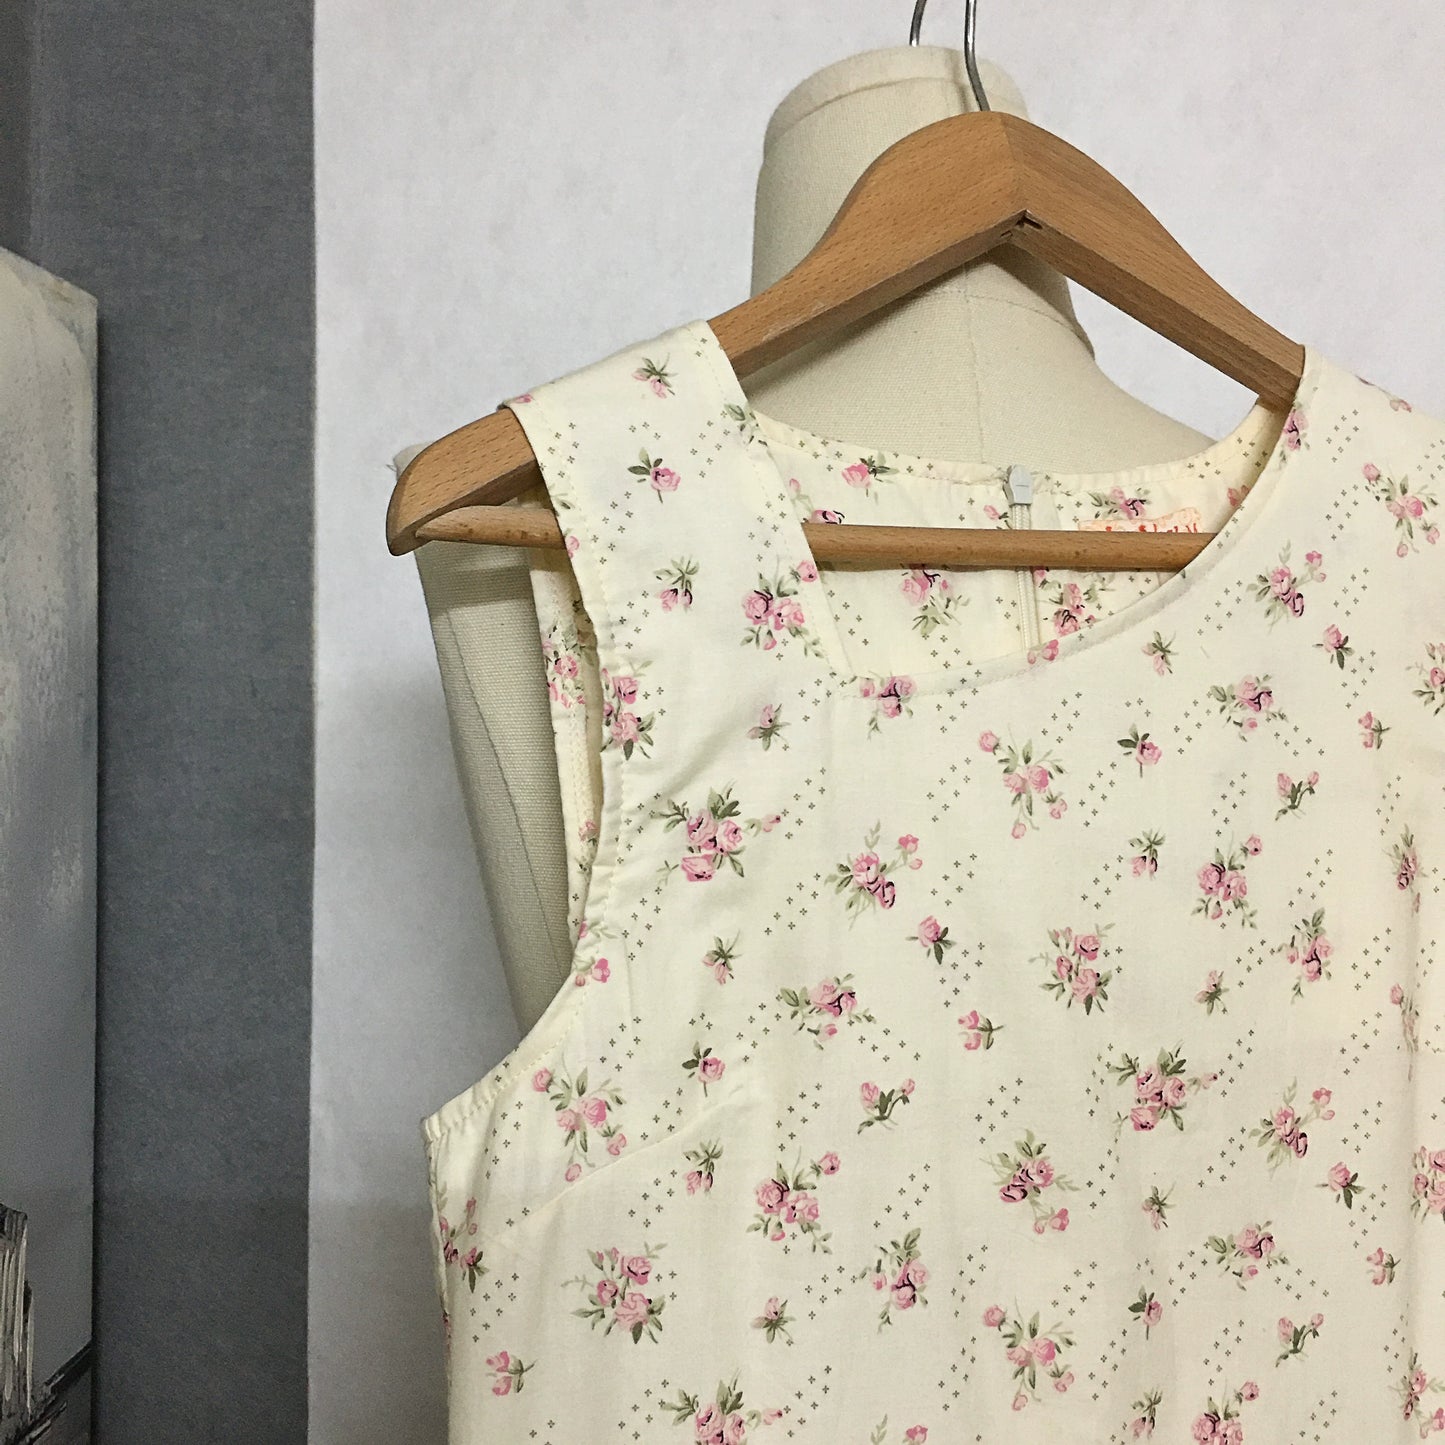 Vintage Art Floral Cotton Dress (Shipping included)